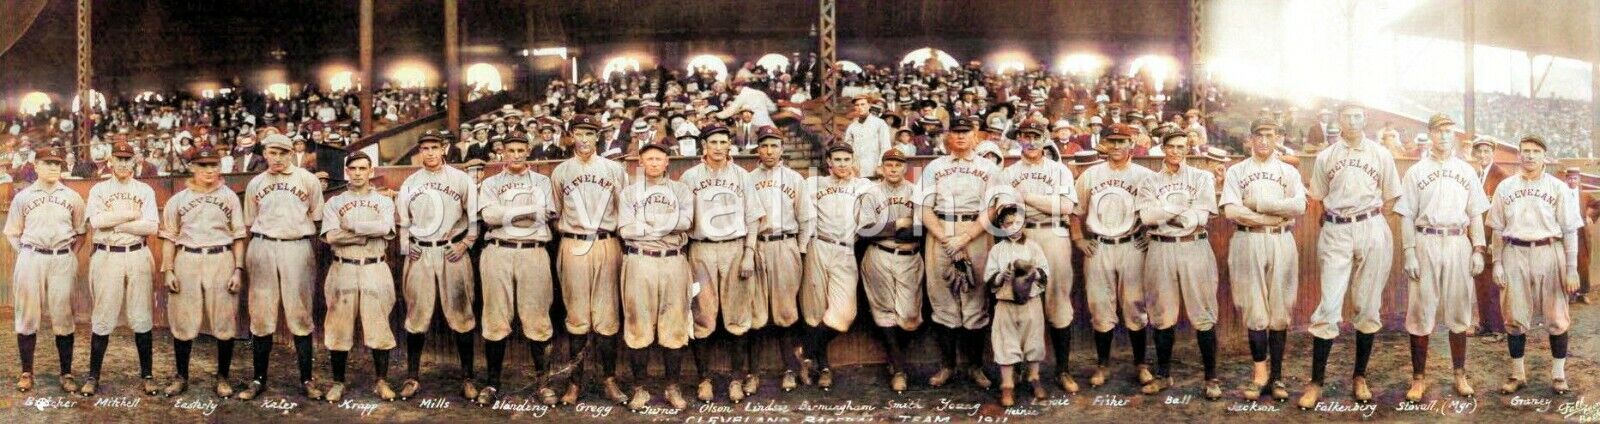 1911 Cleveland Naps-12 x 4 Colorized Panoramic Print